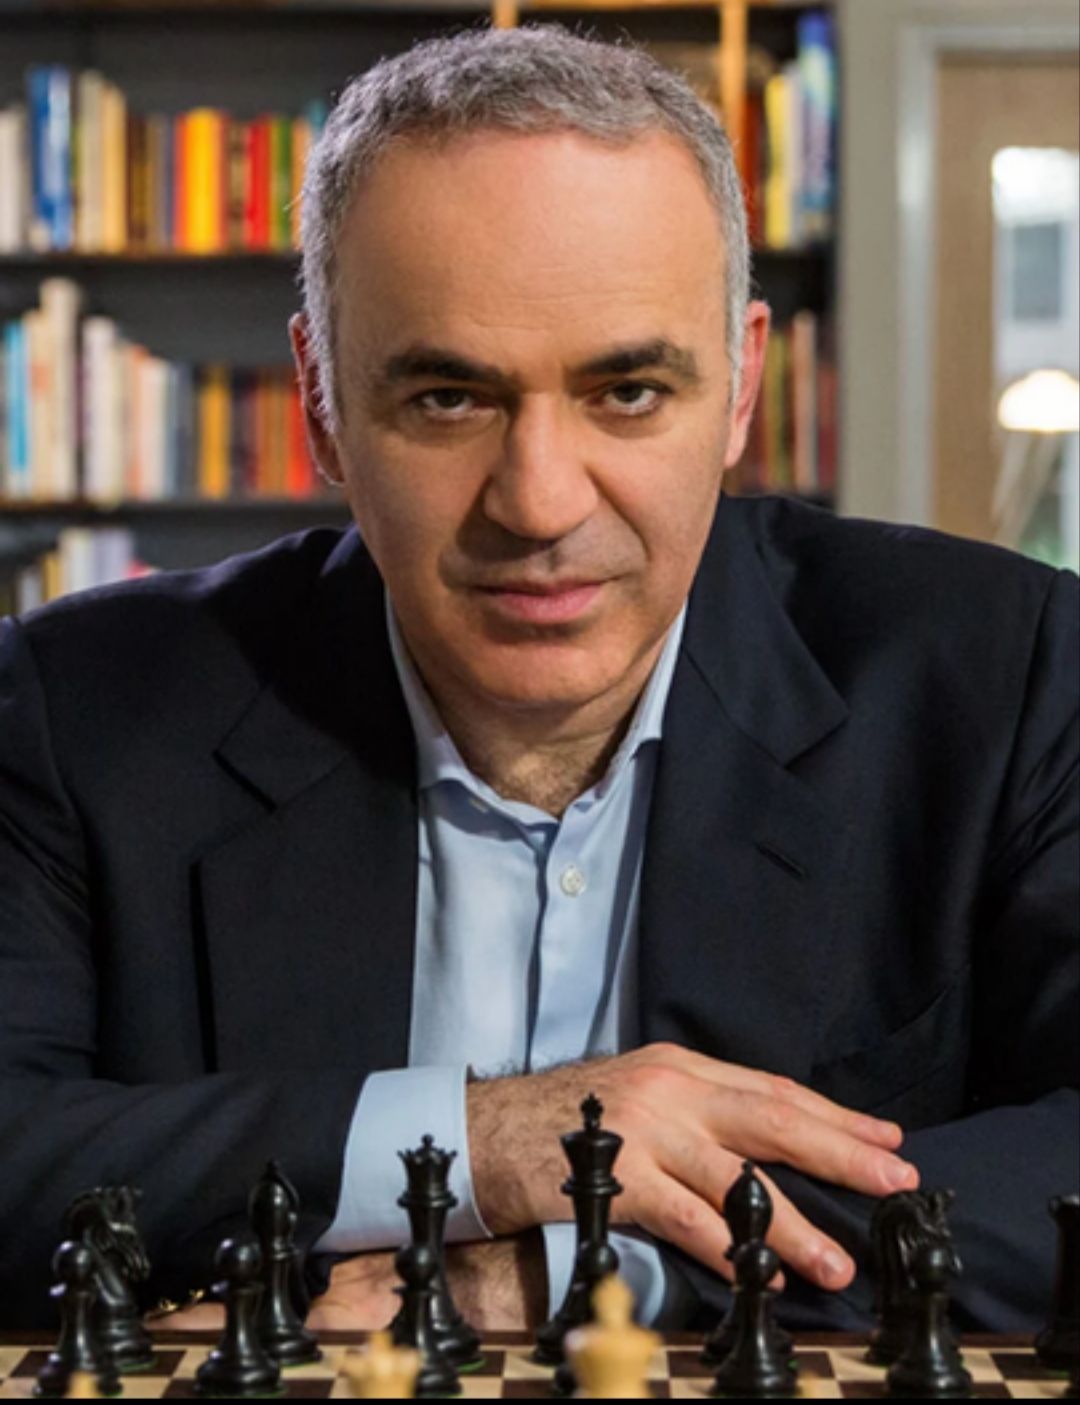 Five Best Chess Players of All Time